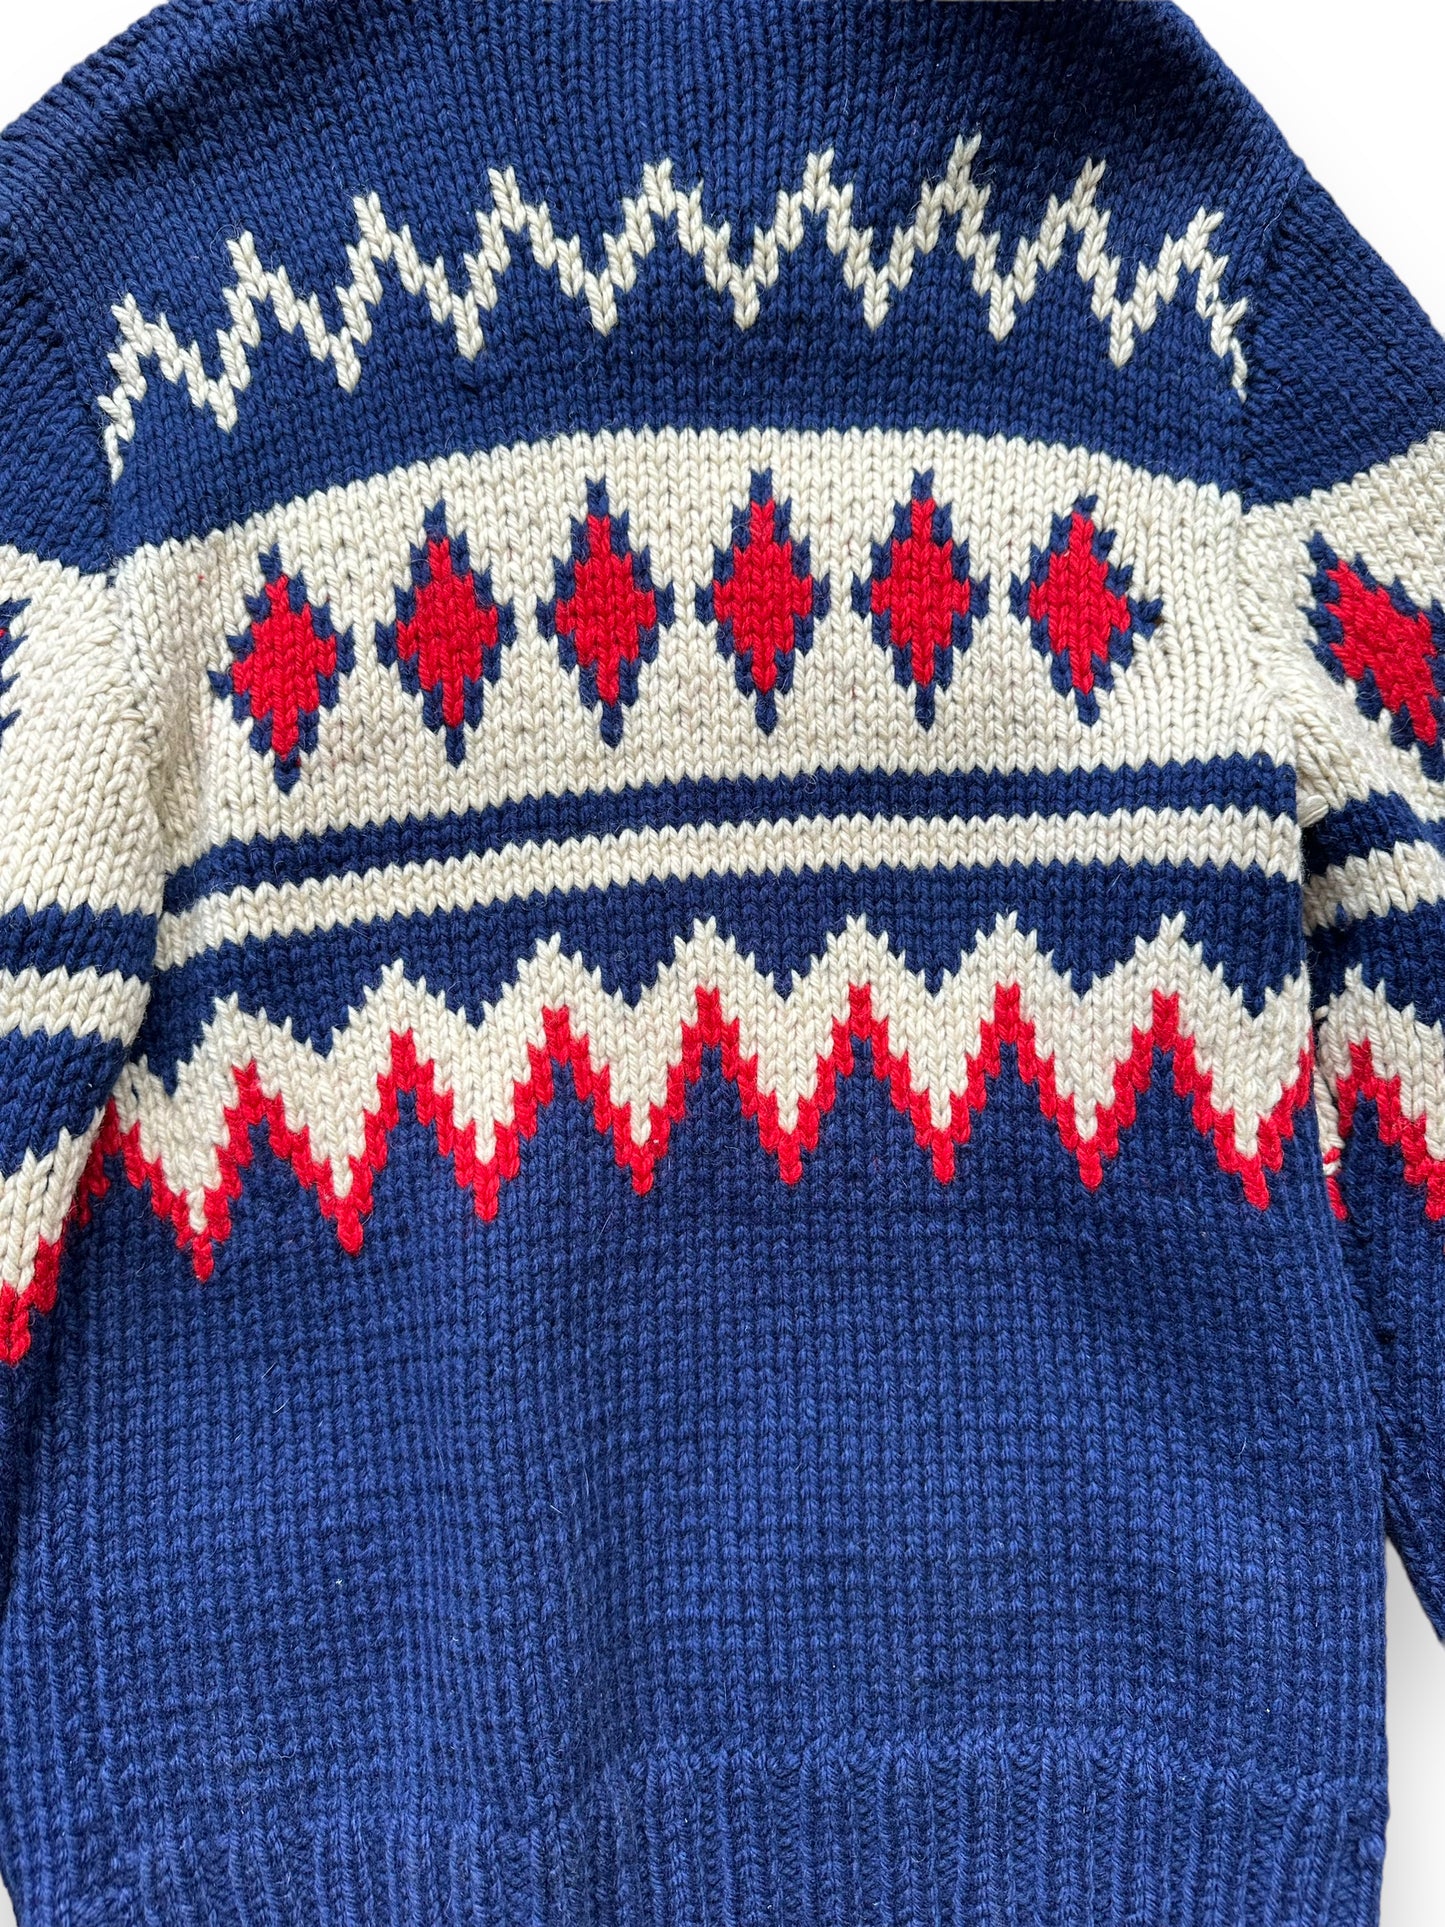 Rear Detail Close Up on Vintage Cowichan Style Blue & Red Sweater SZ M  |  Barn Owl Vintage | Seattle Vintage Sweaters